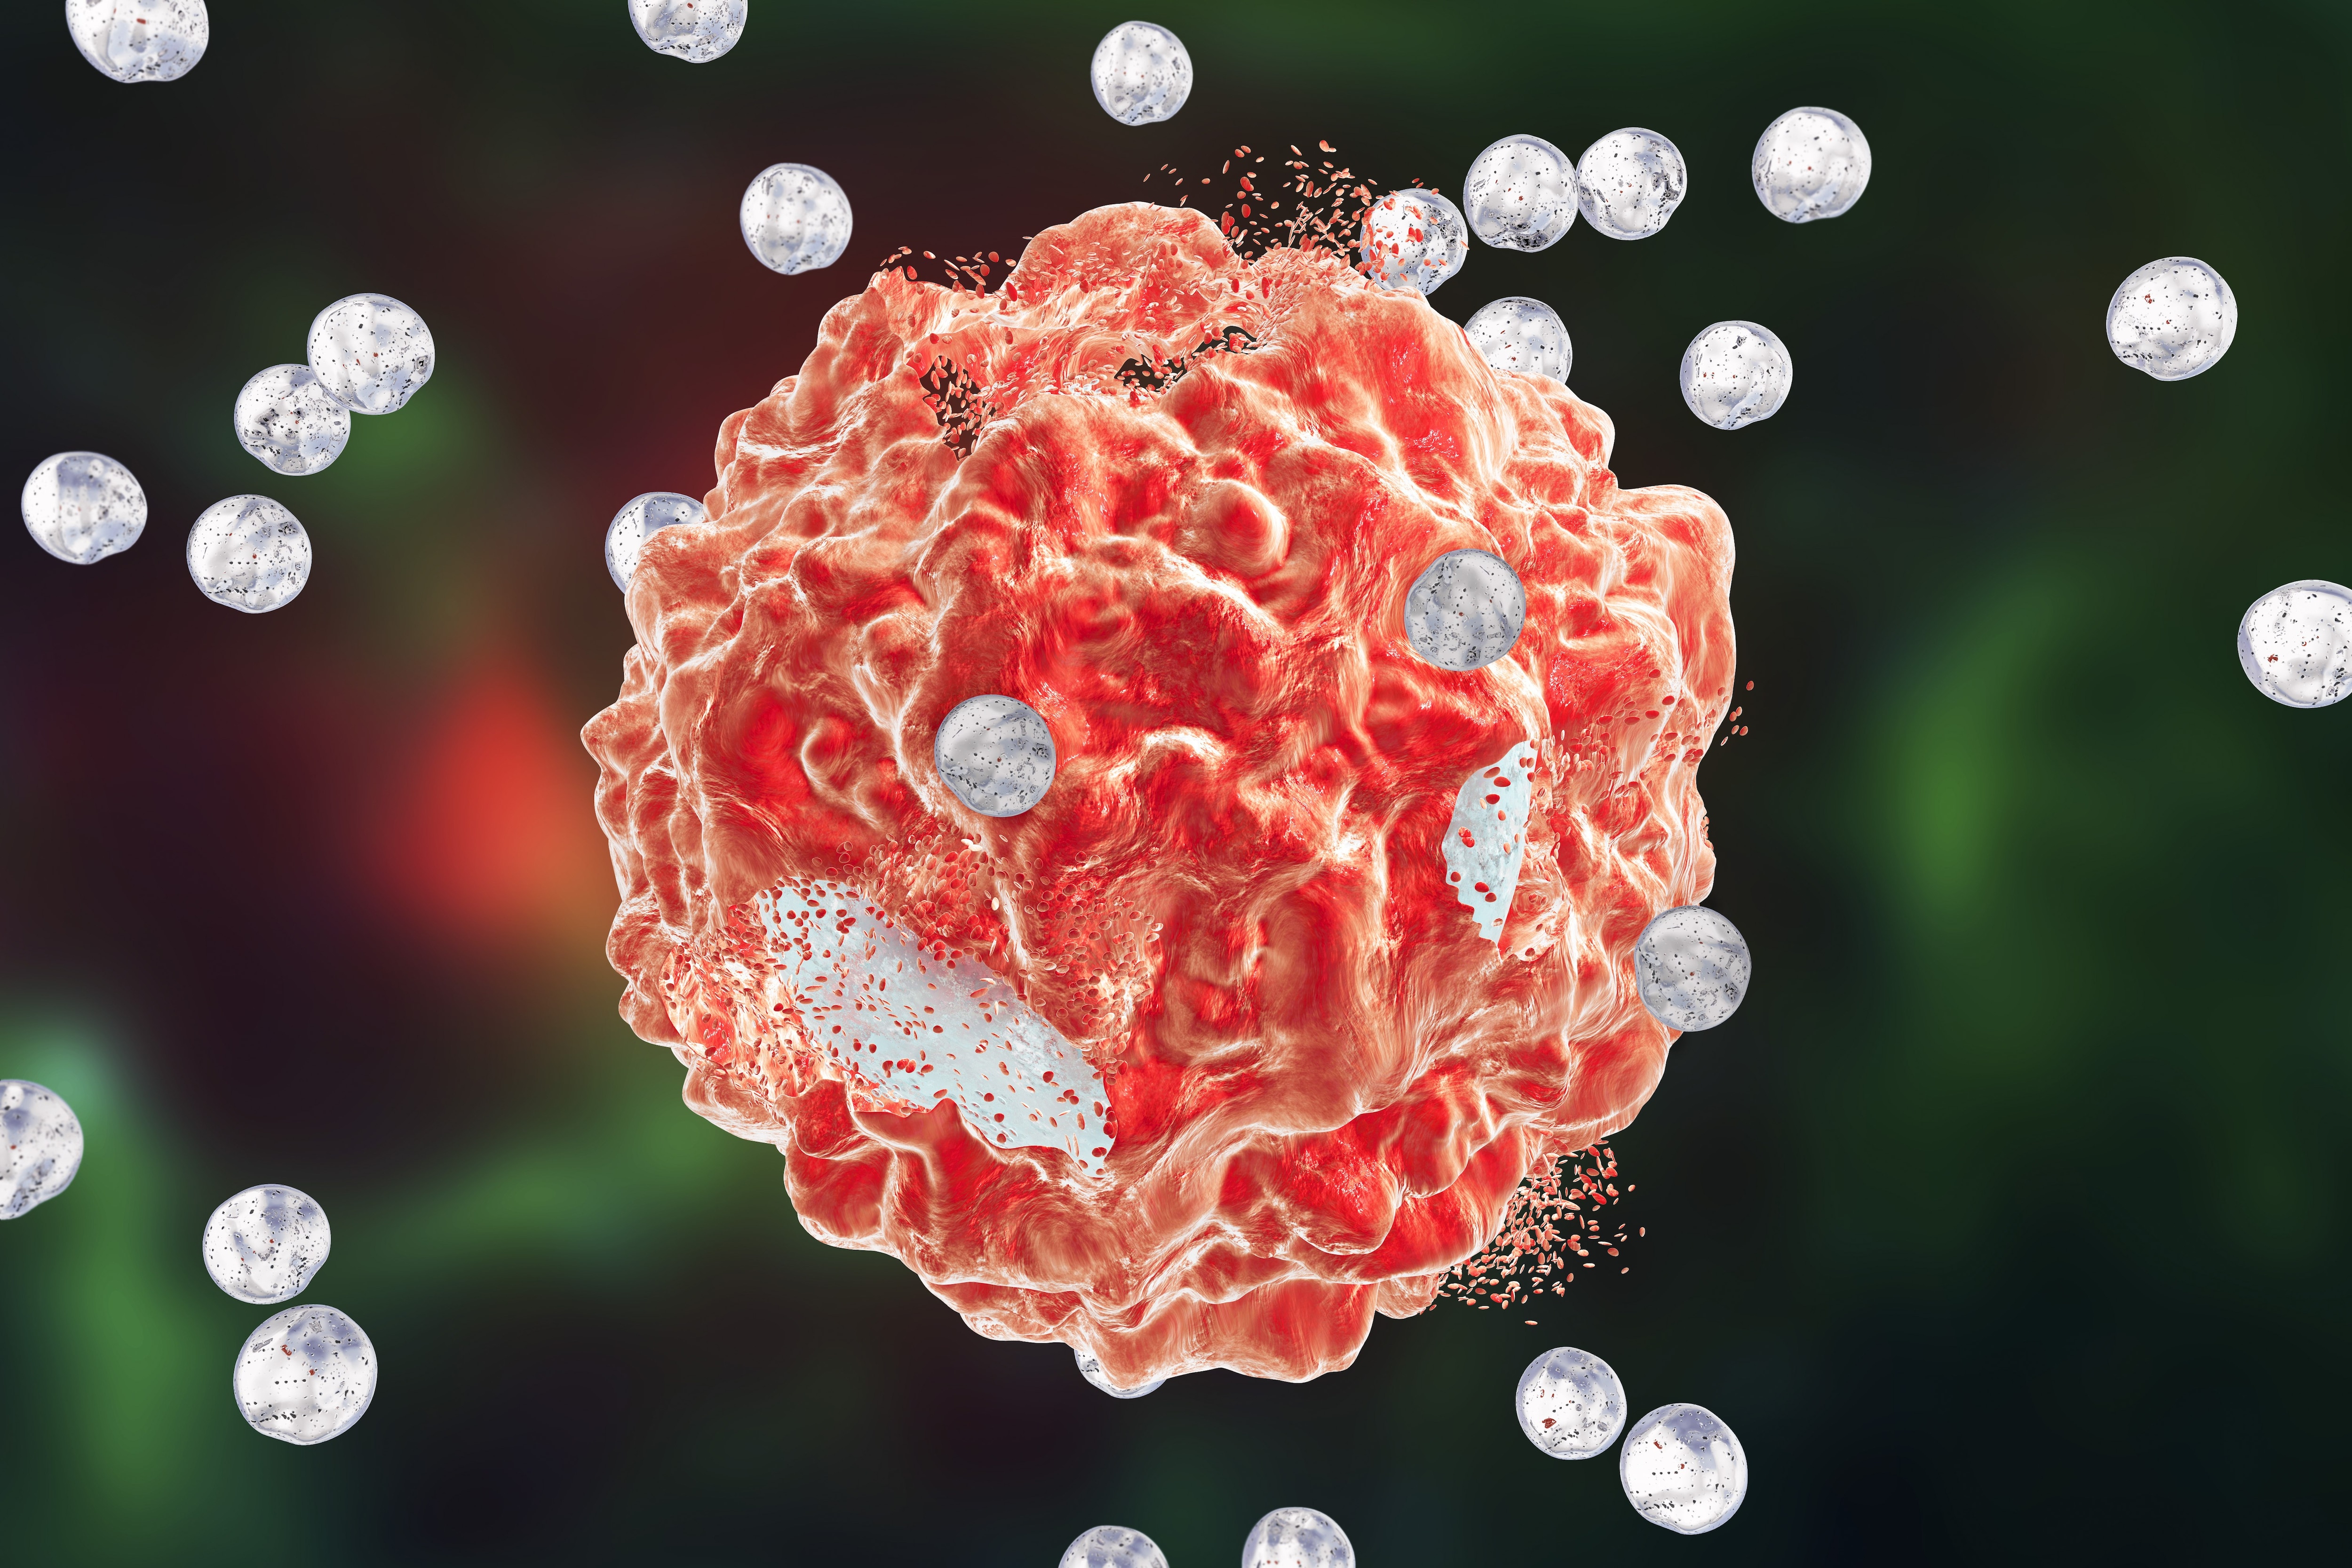 Abstract illustration of polymeric microspheres or​  nanoparticles attacking tumor cell. f poly